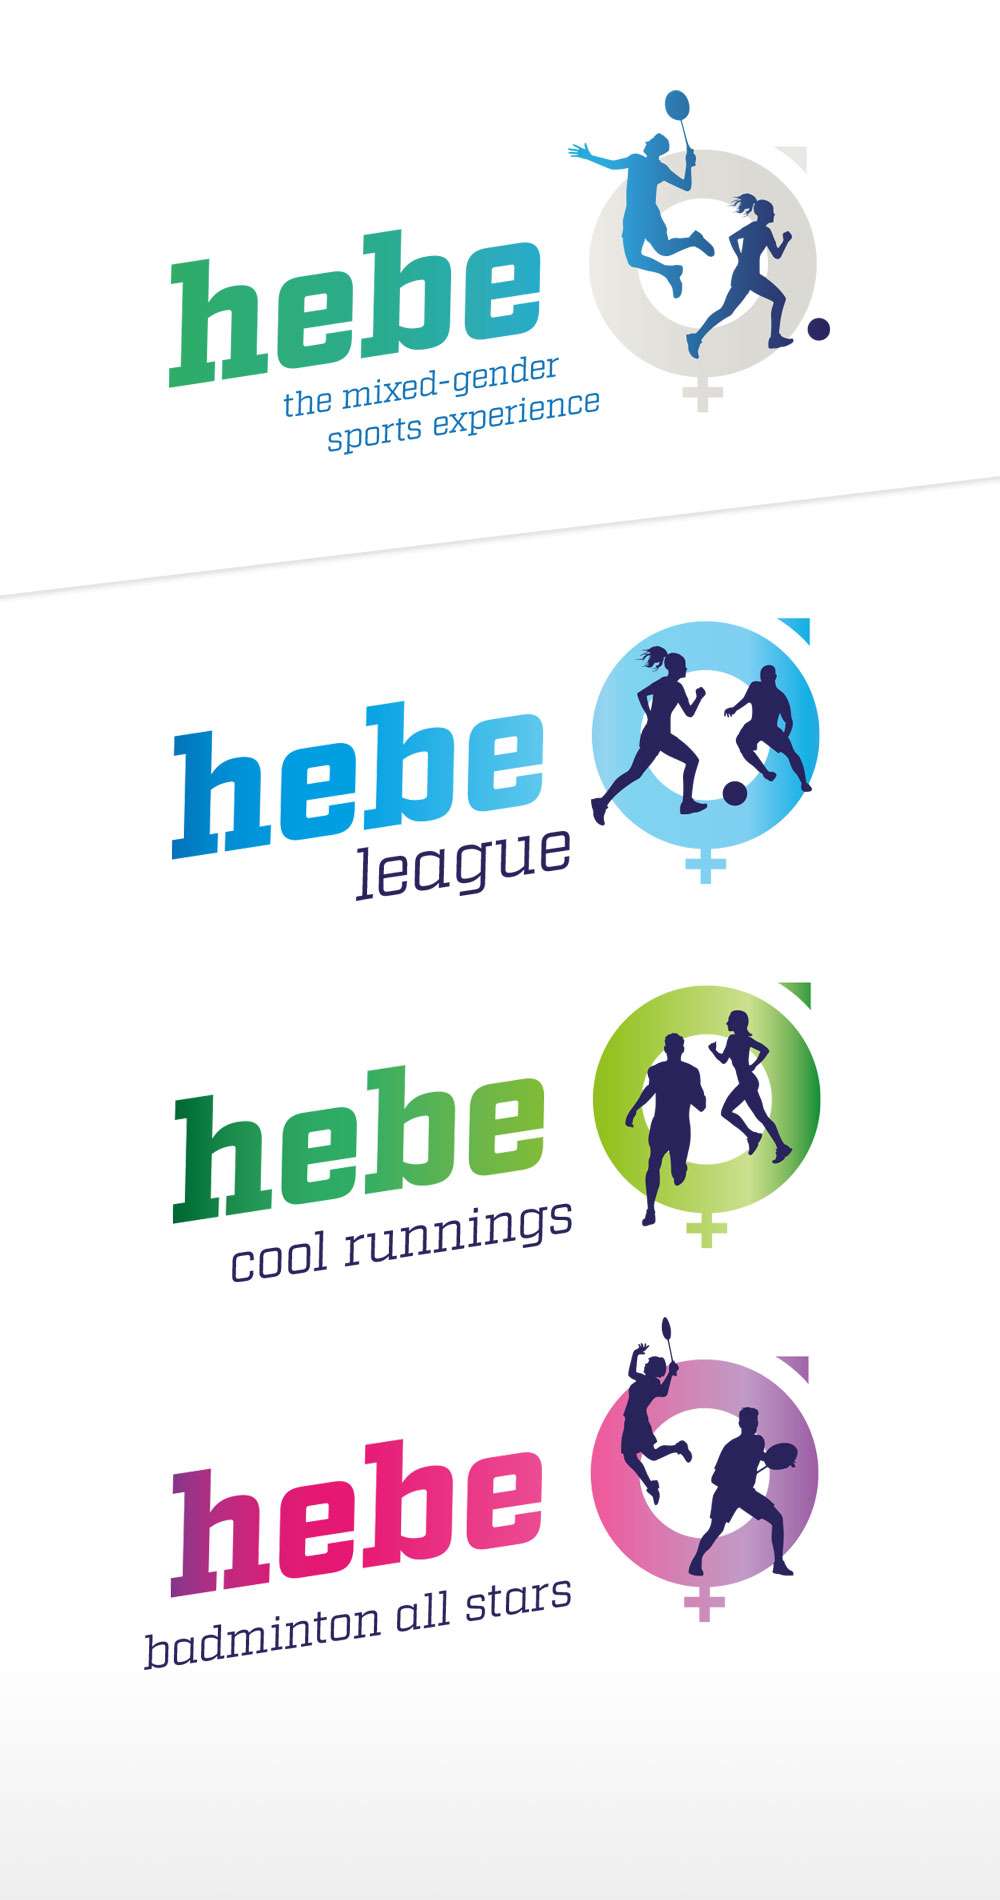 HEBE the mixed-gender sports experience